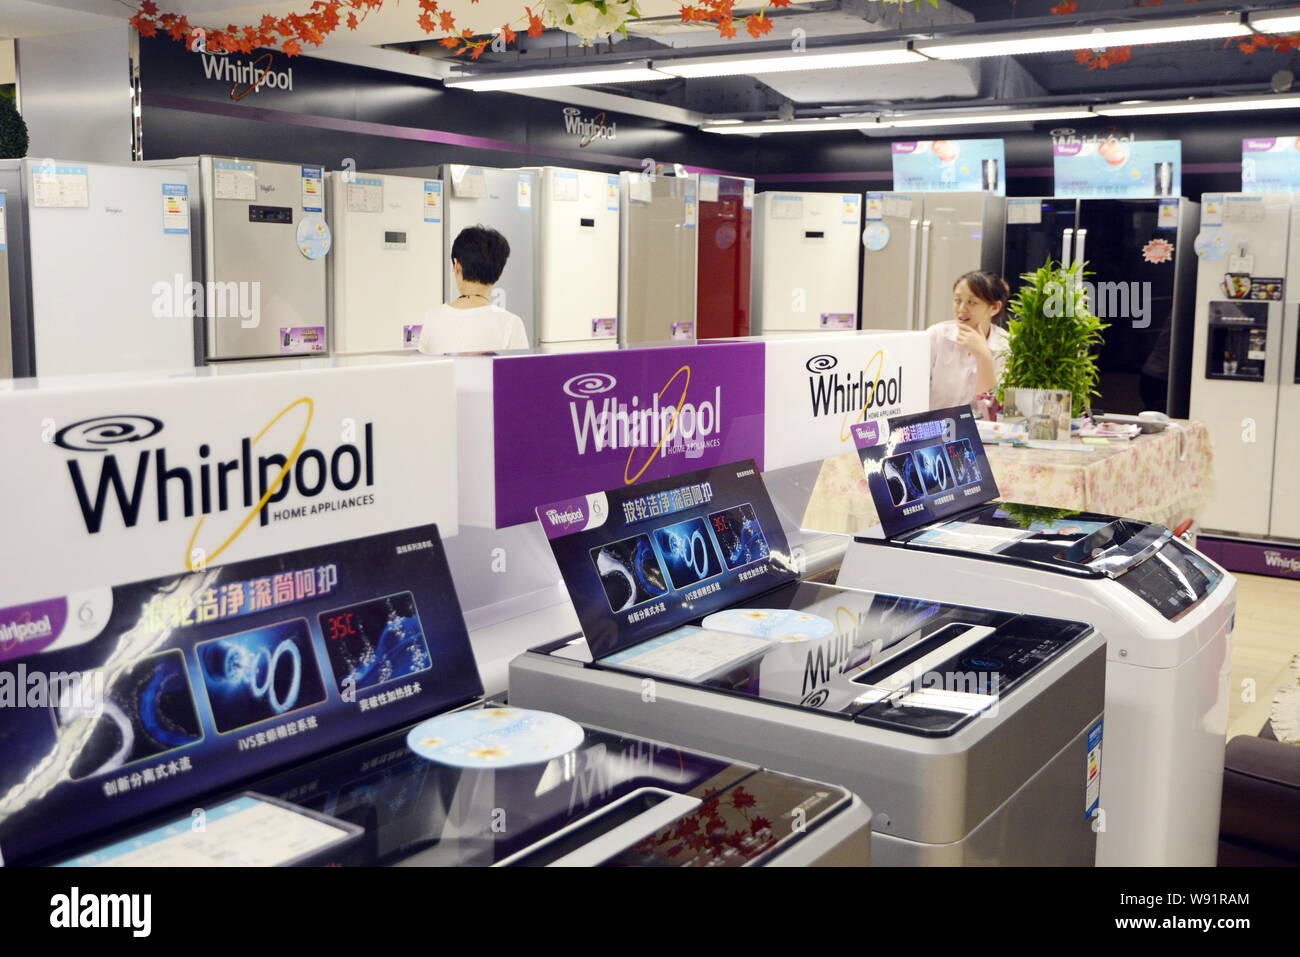 --FILE--A customer walks past Whirlpool washing machines as she shops for a Whirlpool refrigerator at a home appliances store in Dalian city, northeas Stock Photo